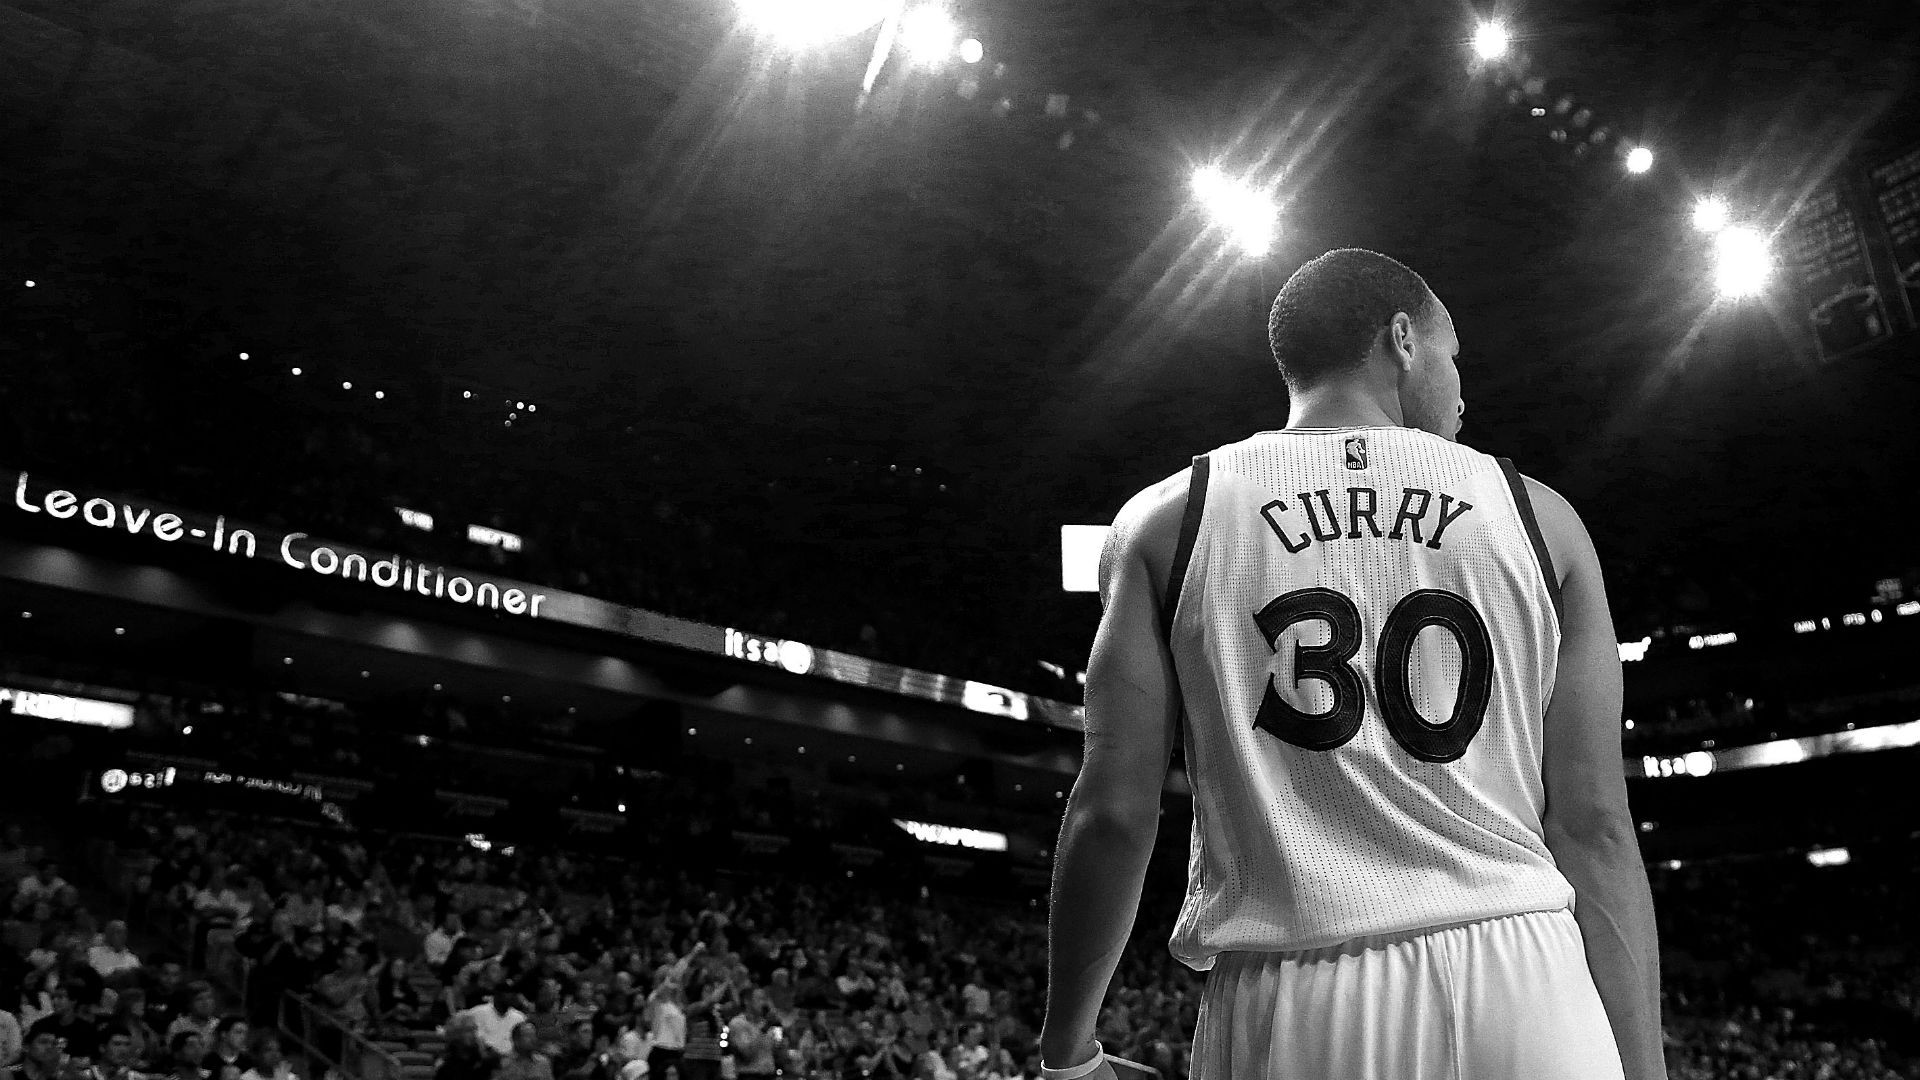 1920x1080 Free Download Stephen Curry Android Wallpaper.